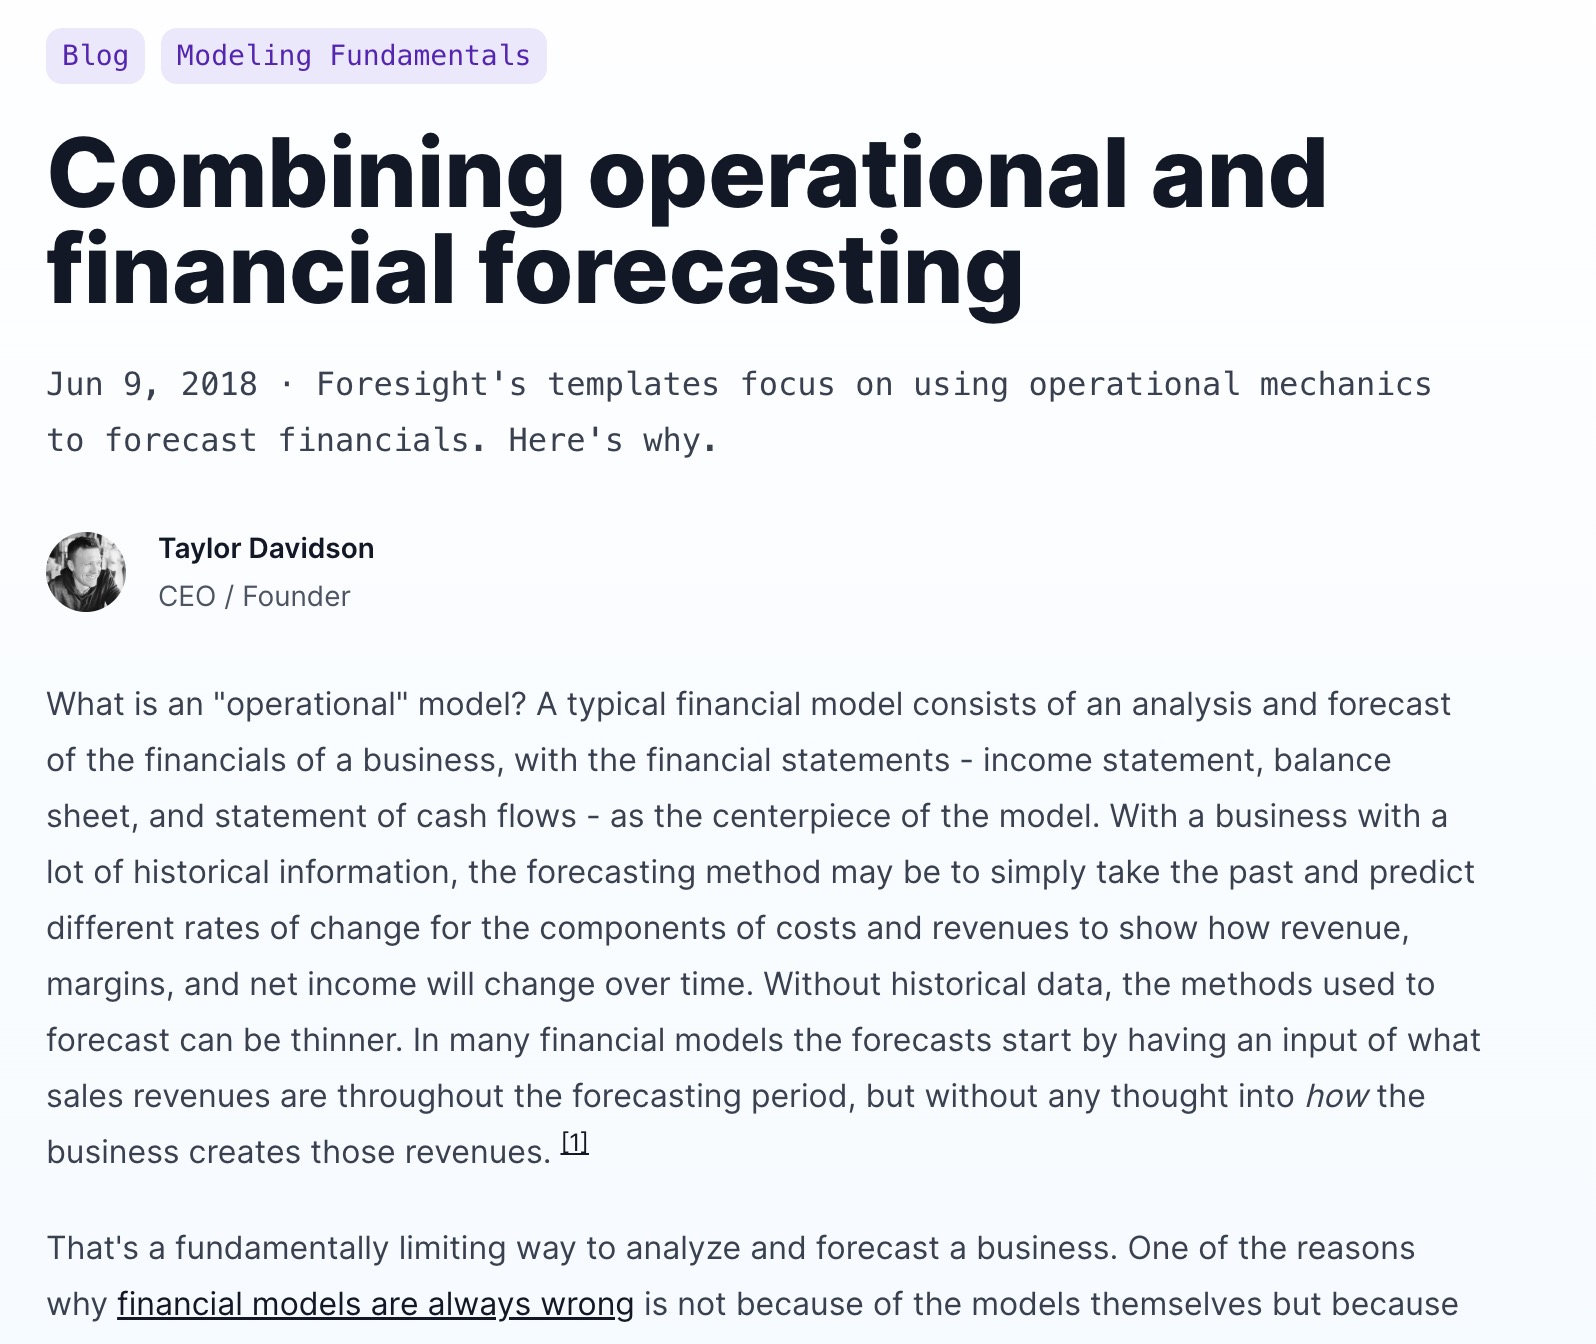 Combining operational and financial forecasting